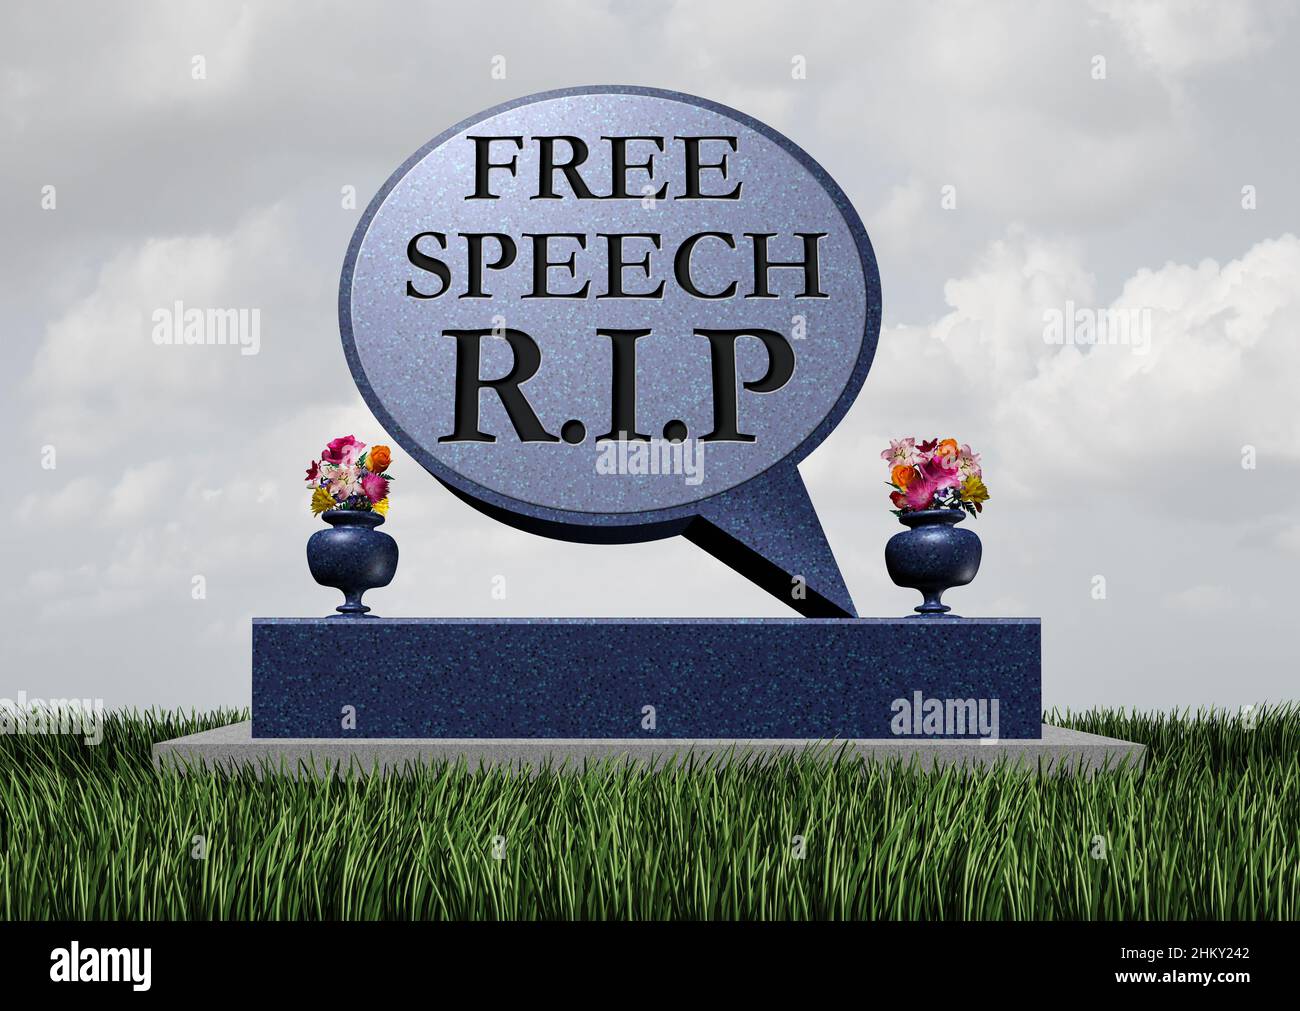 Free speech death and censorship or Cancel Culture concept and cultural cancellation as social media censor canceling or restricting communication. Stock Photo